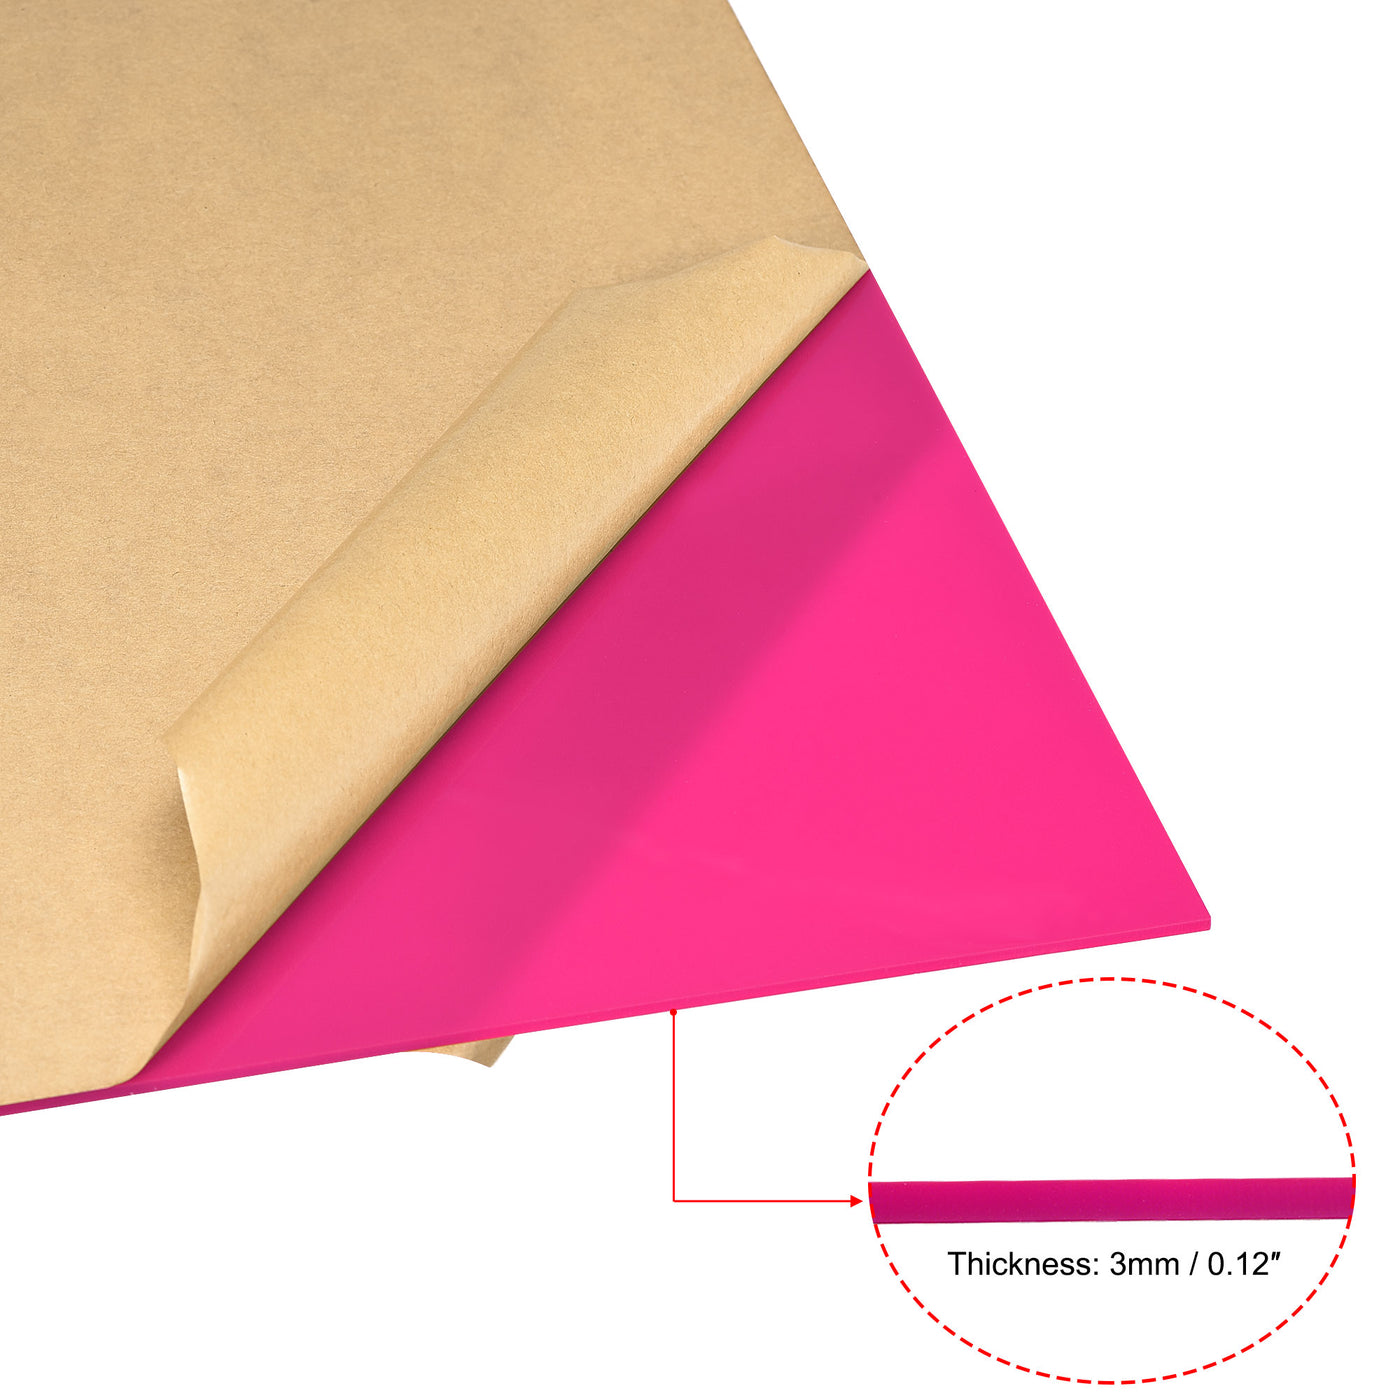 uxcell Uxcell Pink Cast Acrylic Sheet,12" x 24",3mm Thick,Plastic PMMA Acrylic Board